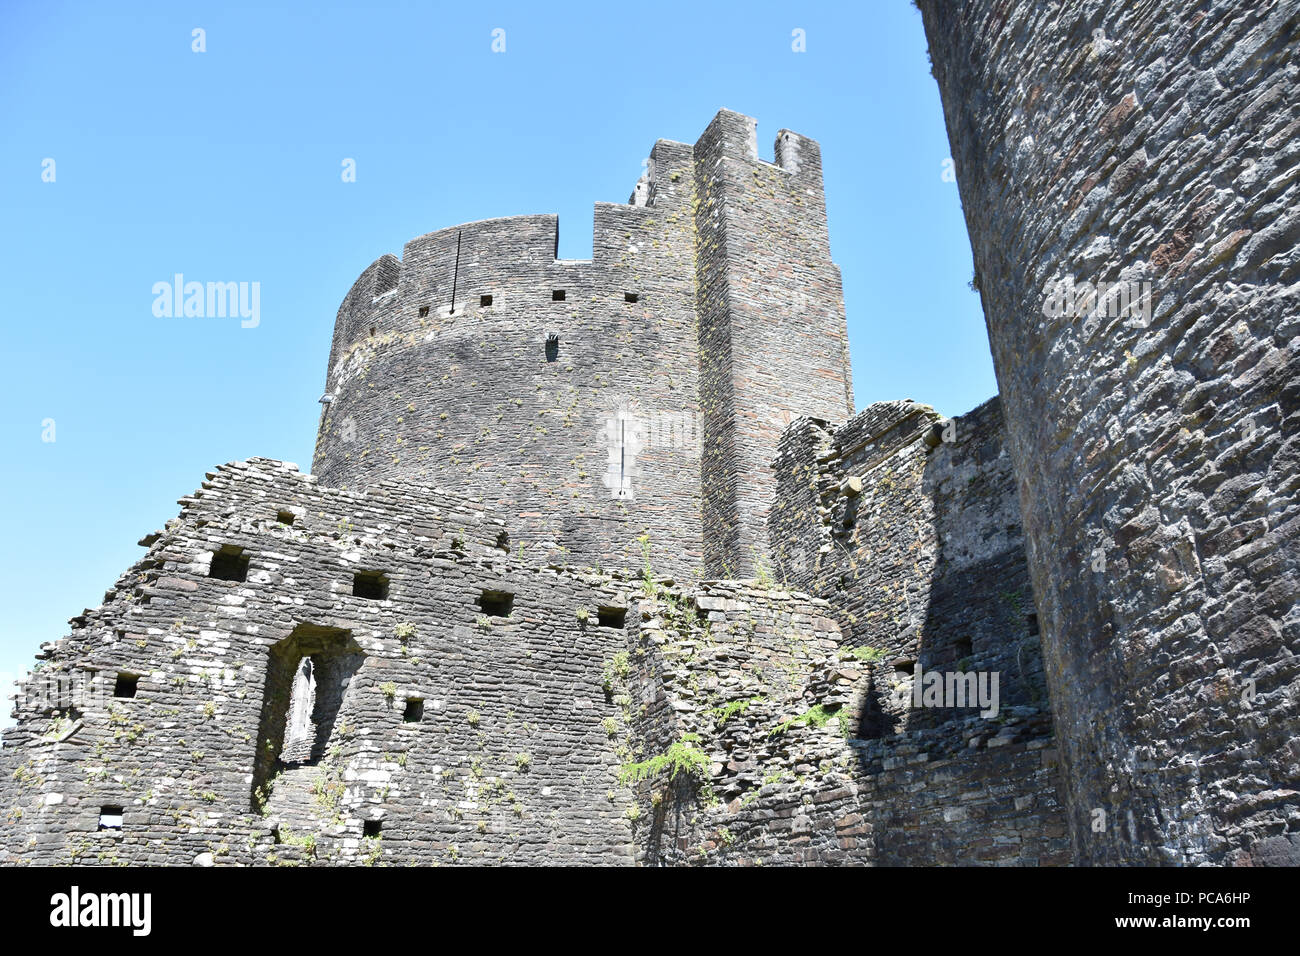 Caerphilly Castle, second largest castle in UK. Caerphilly, Wales. June, 2018 Stock Photo